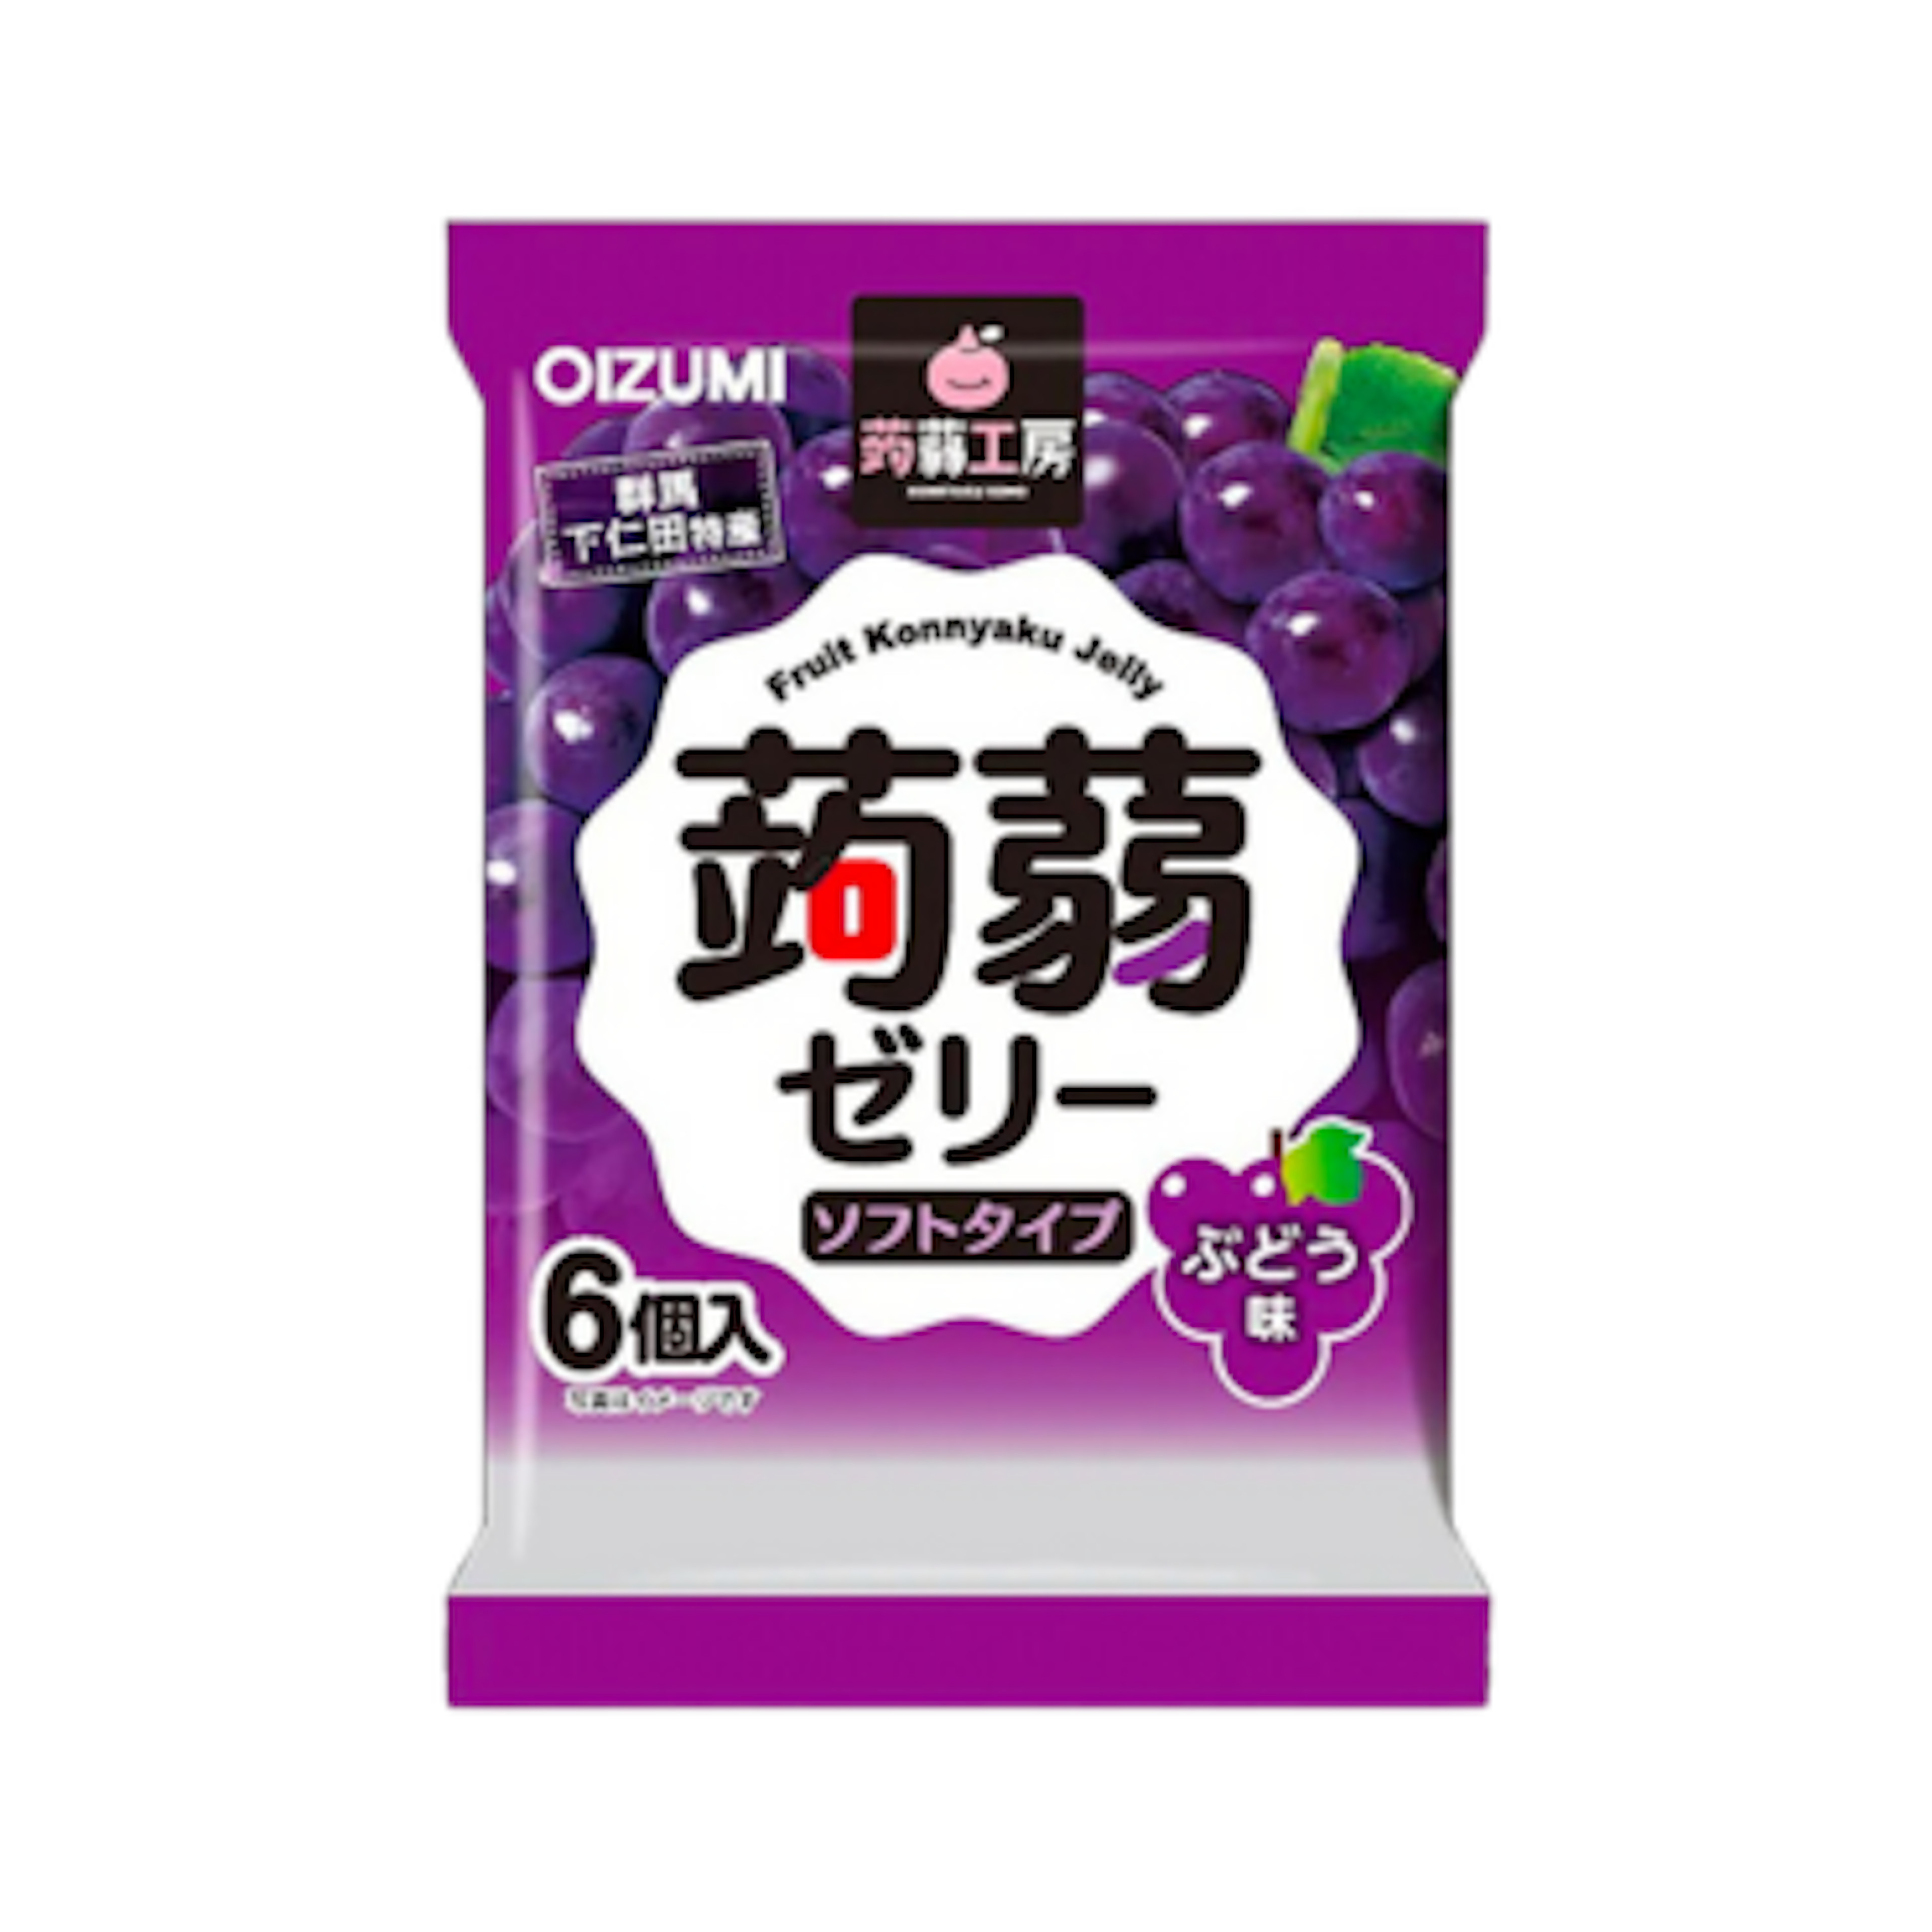 OIZUMI Konjac Jelly Grapes 106g - Low calorie and healthy snack